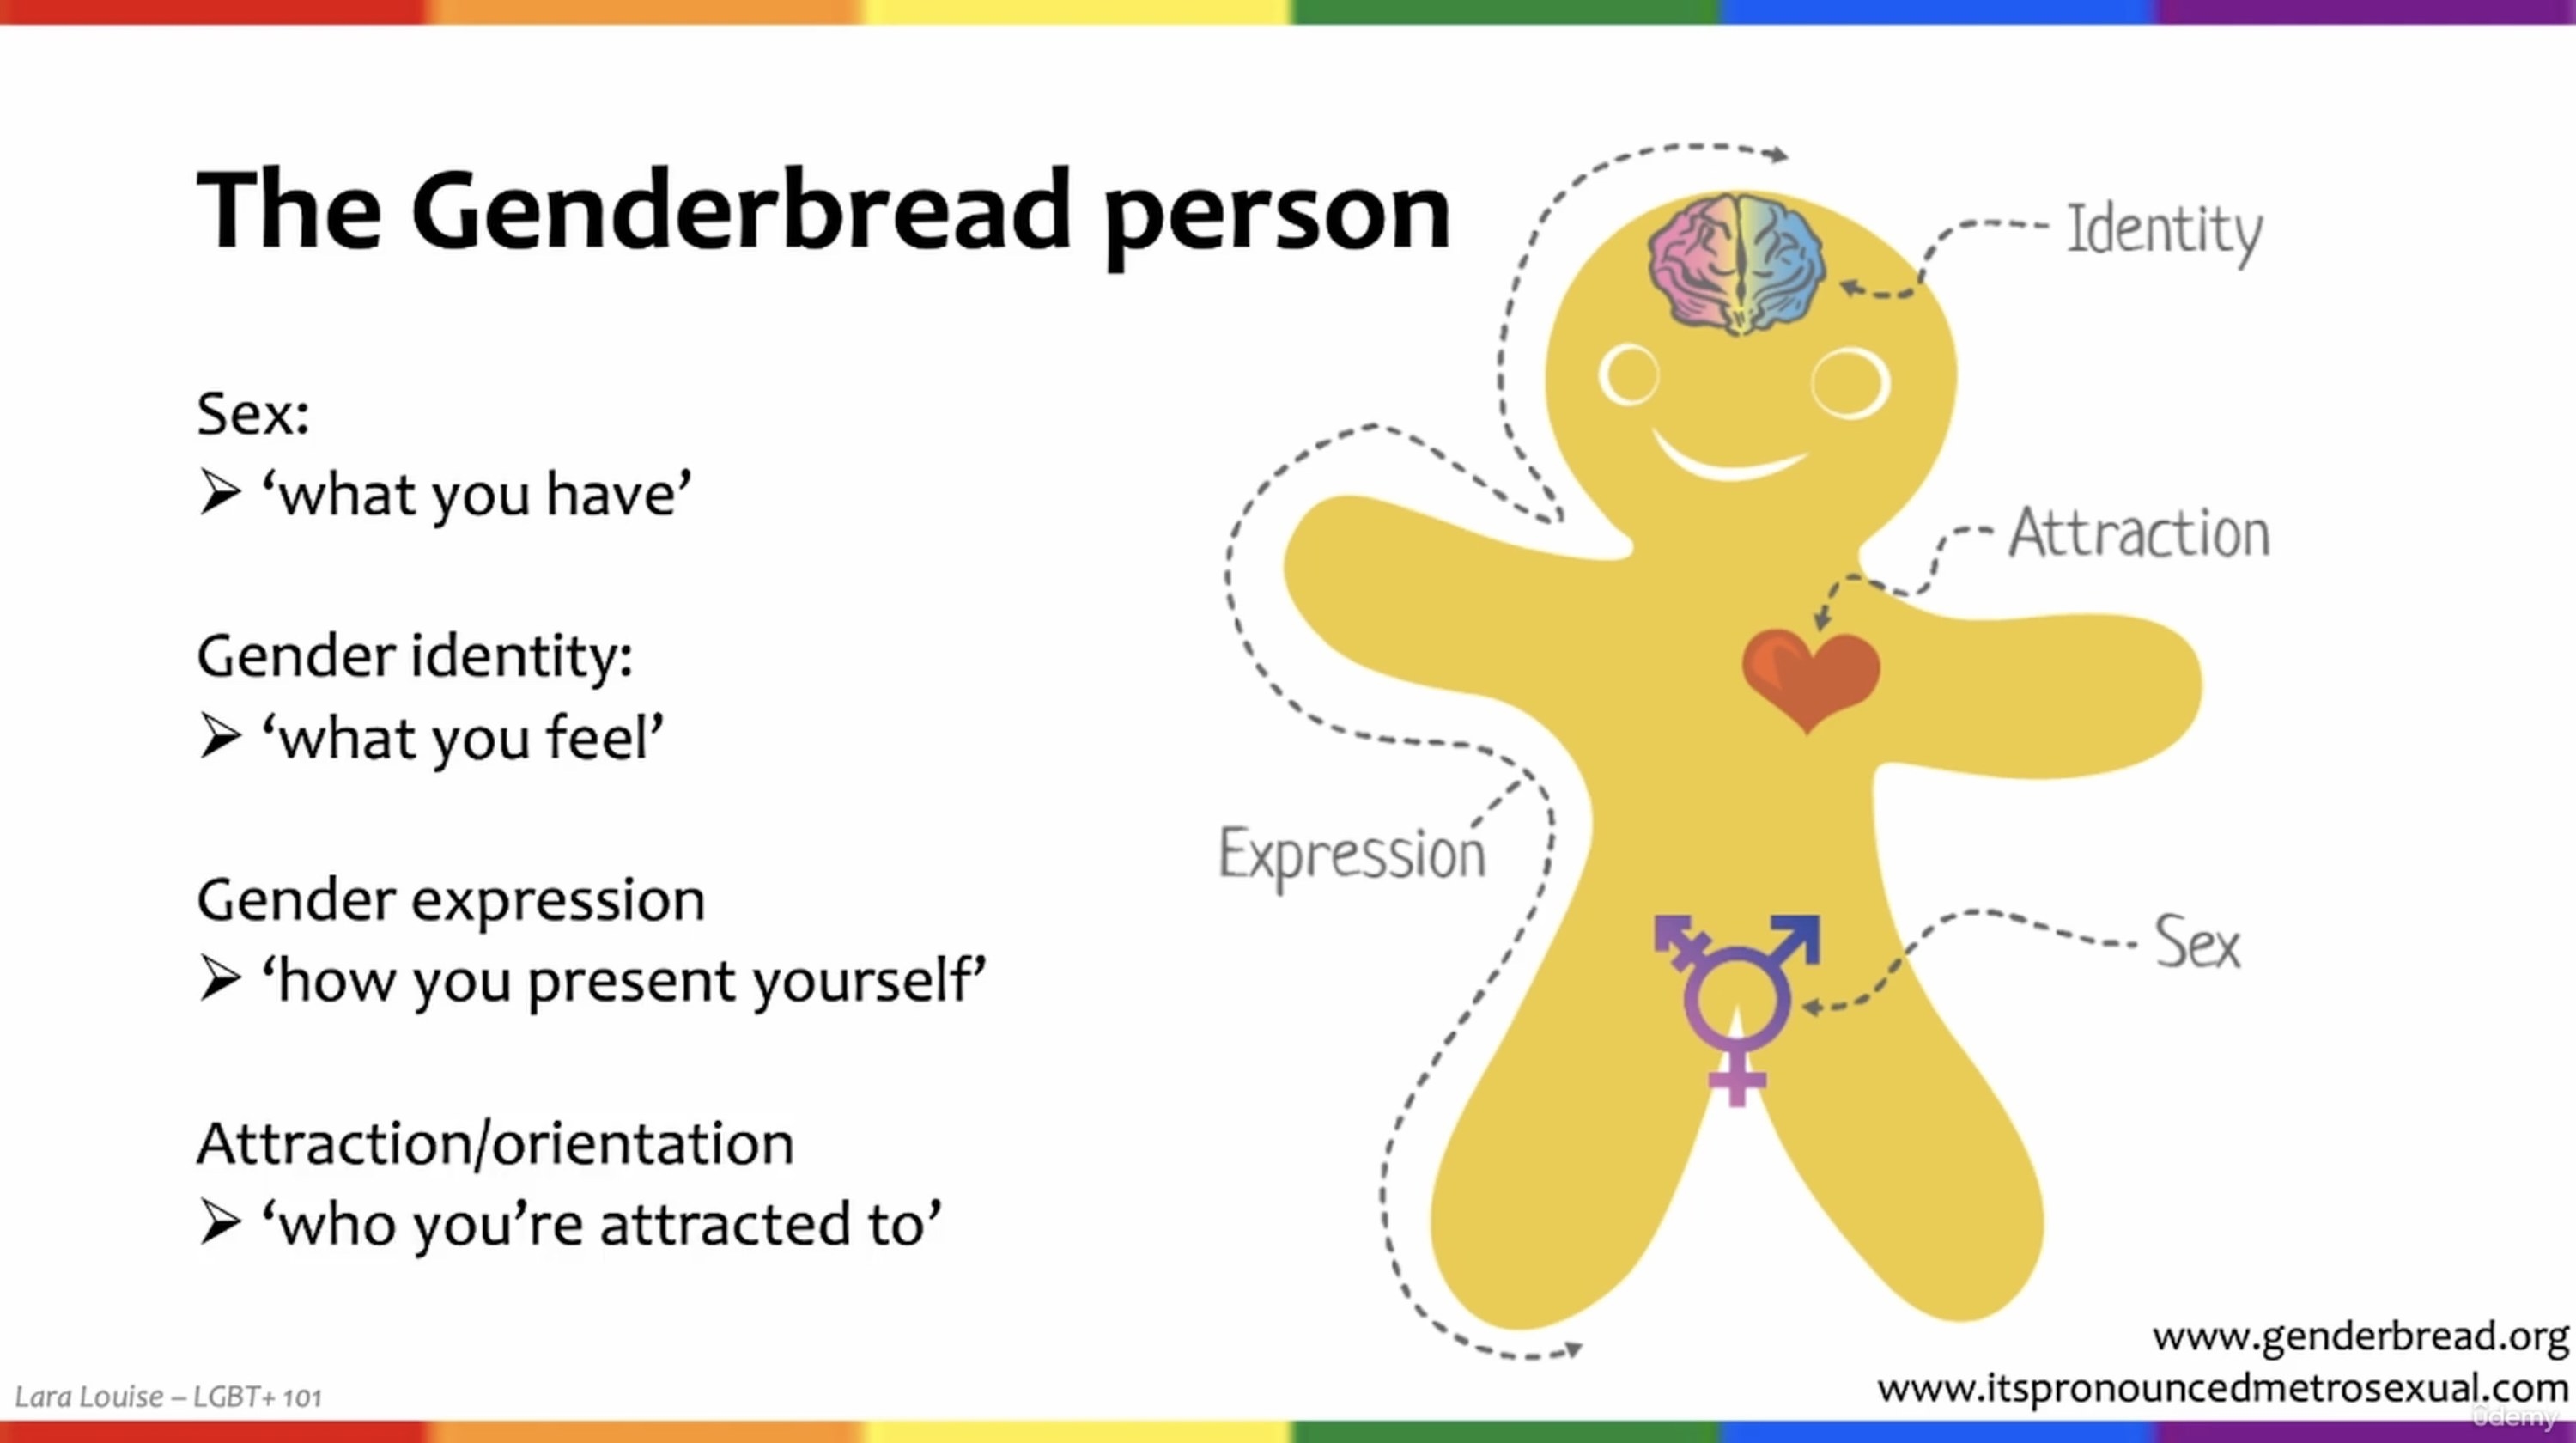 udemy course explaining the concepts of gender identity &amp; expression, and sexual attraction